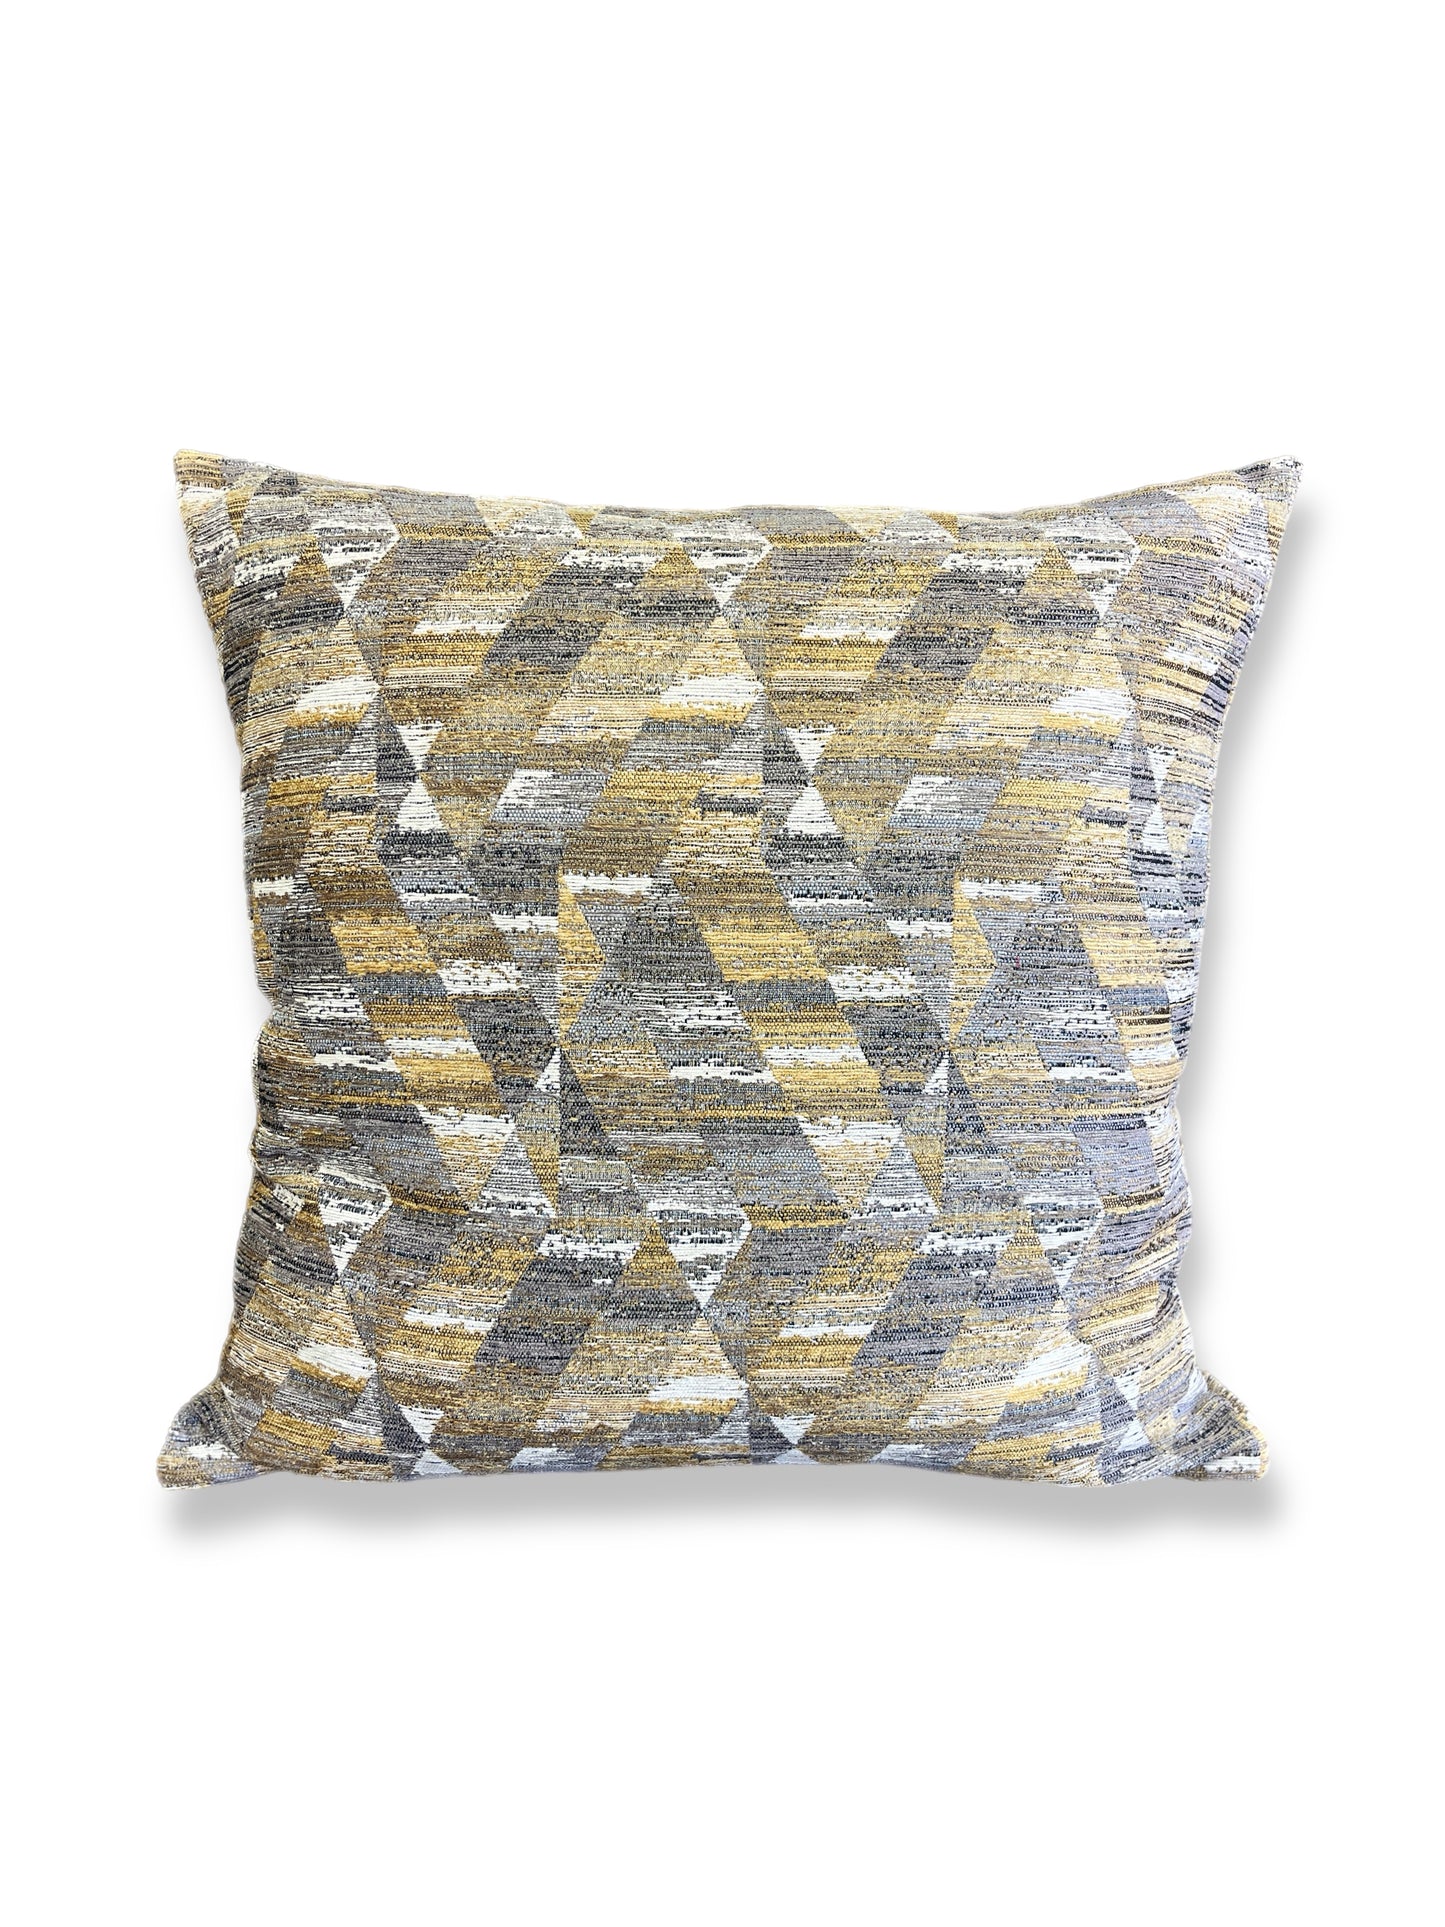 Luxury Pillow -  24" x 24" - Pyramid Jewel; Woven pyramids of black, gold, grey, and cream with hints of lustrous golden threads